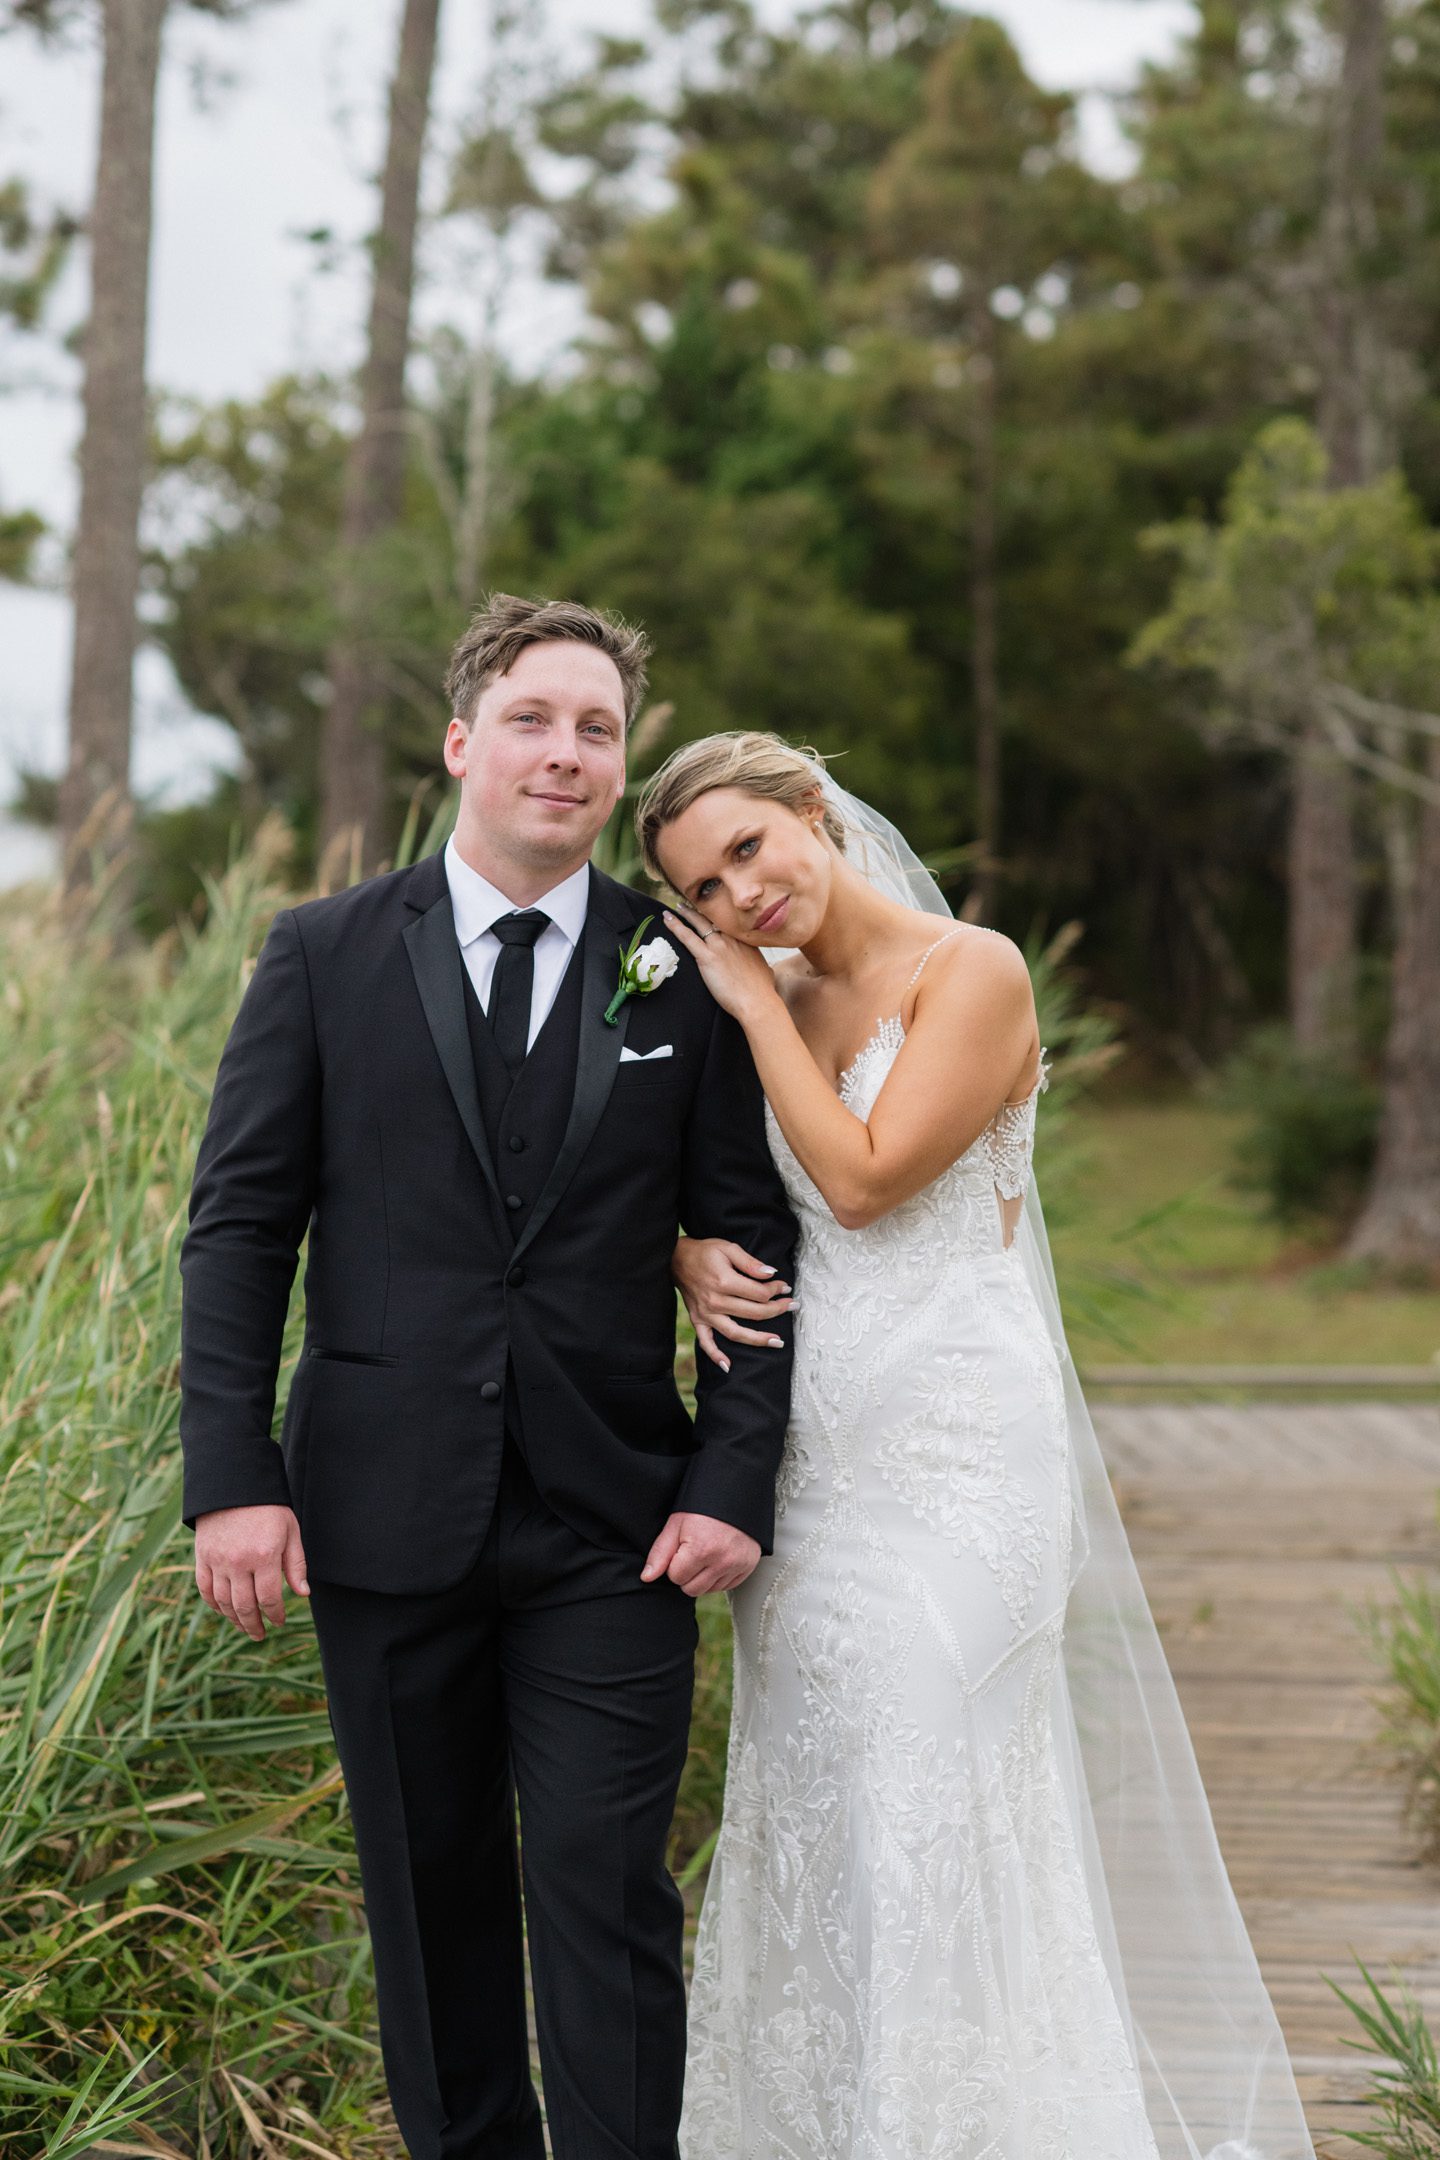 Outer Banks wedding photographer at Festival Park in Manteo